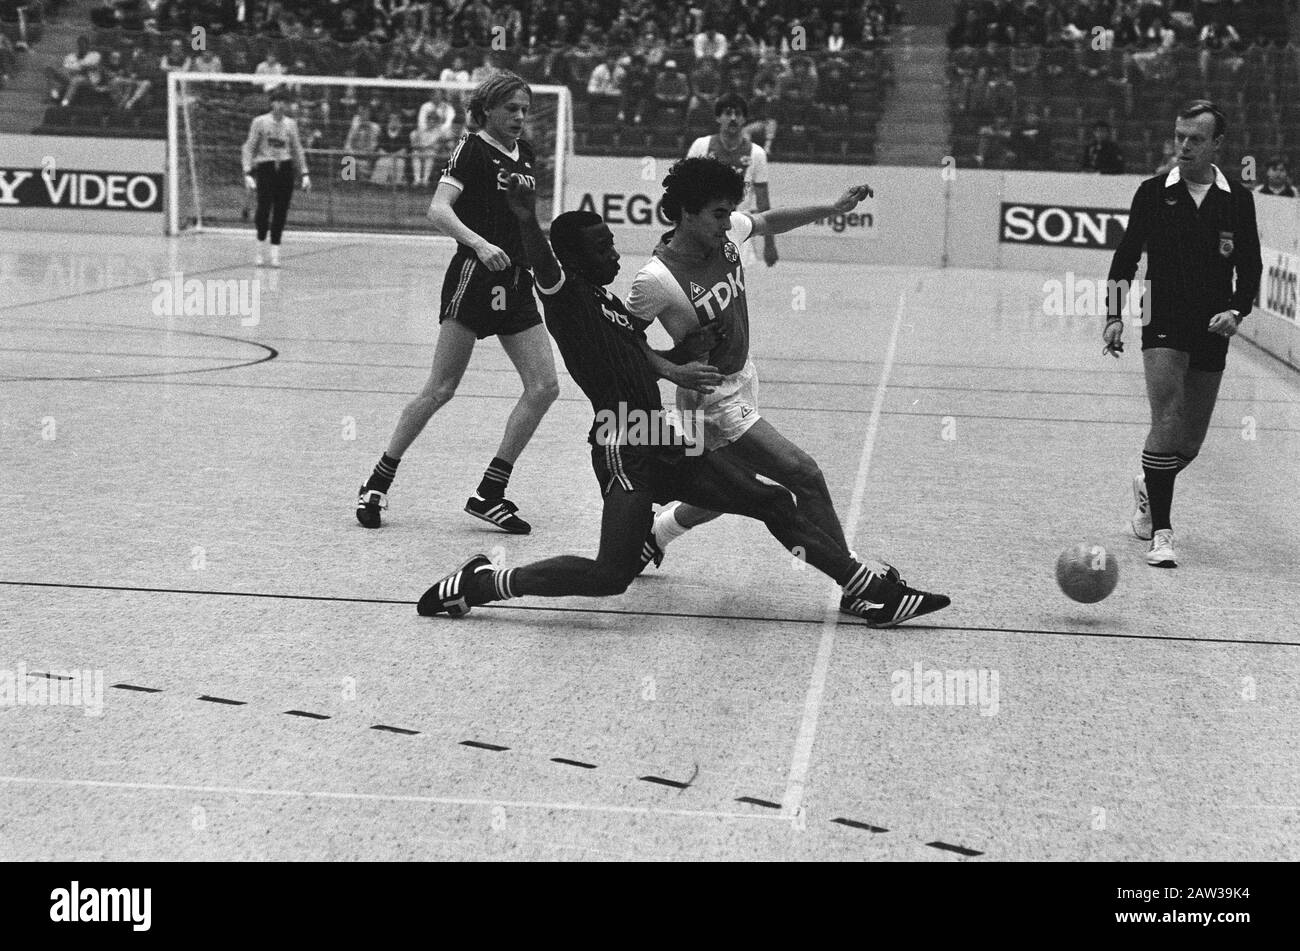 KNVB Sony Indoor Soccer Tournament Ajax against Az67 in Sporthal Zuid in Amsterdam best player of the tournament Gerald Vanenburg (m) of Ajax in action Date: December 29, 1984 Location Amsterdam, Noord-Holland Keywords: sports, tournaments, football Name of Person: Gerald Vanenburg Institution Name: AJAX Stock Photo